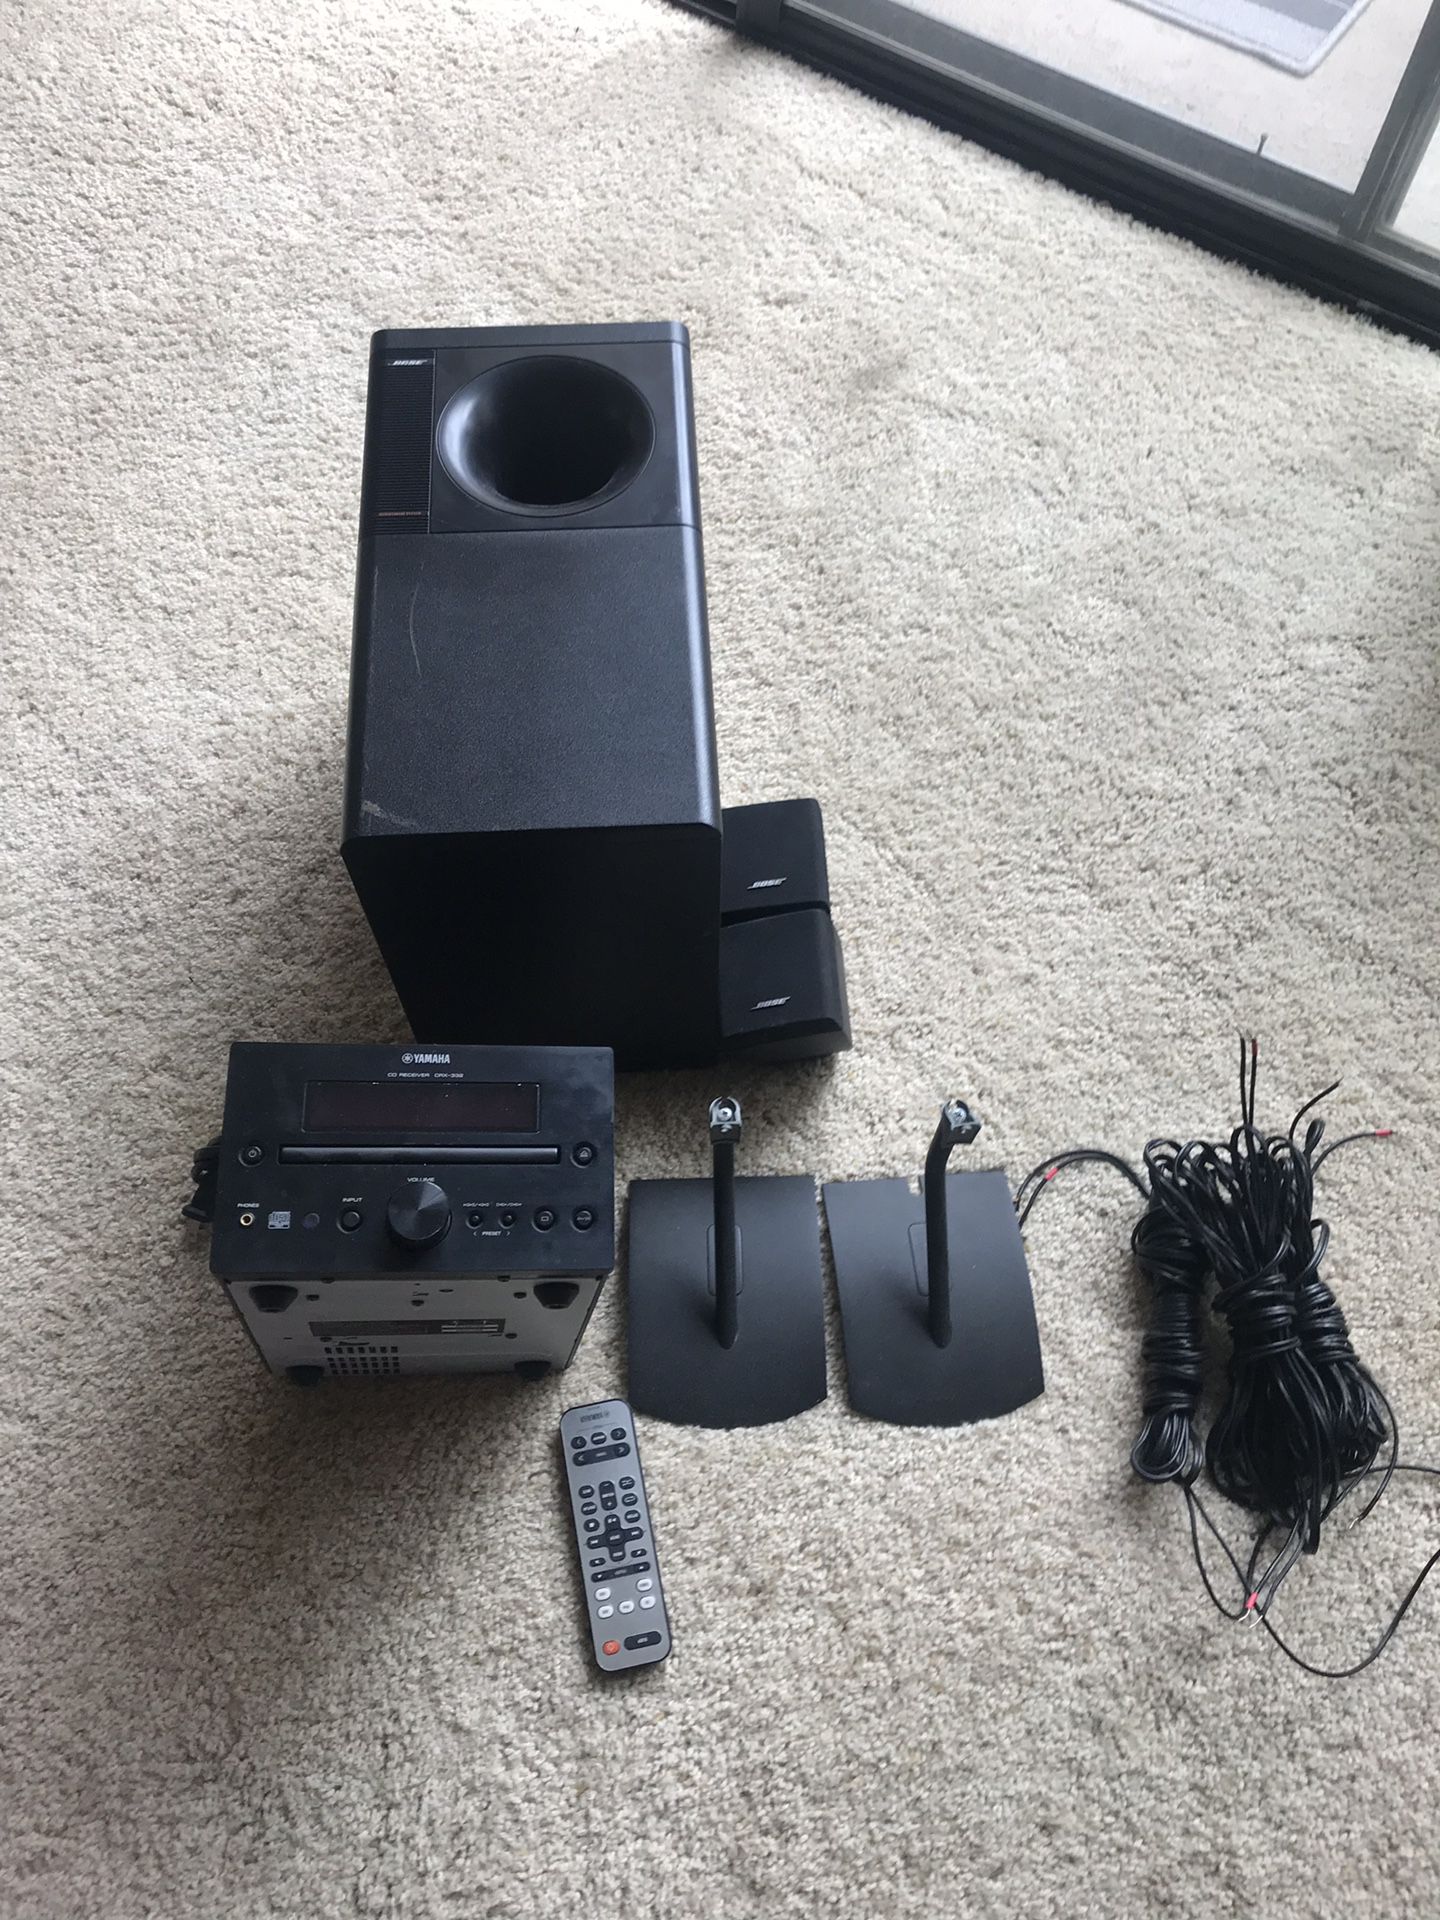 BOSE Surround sound theater system